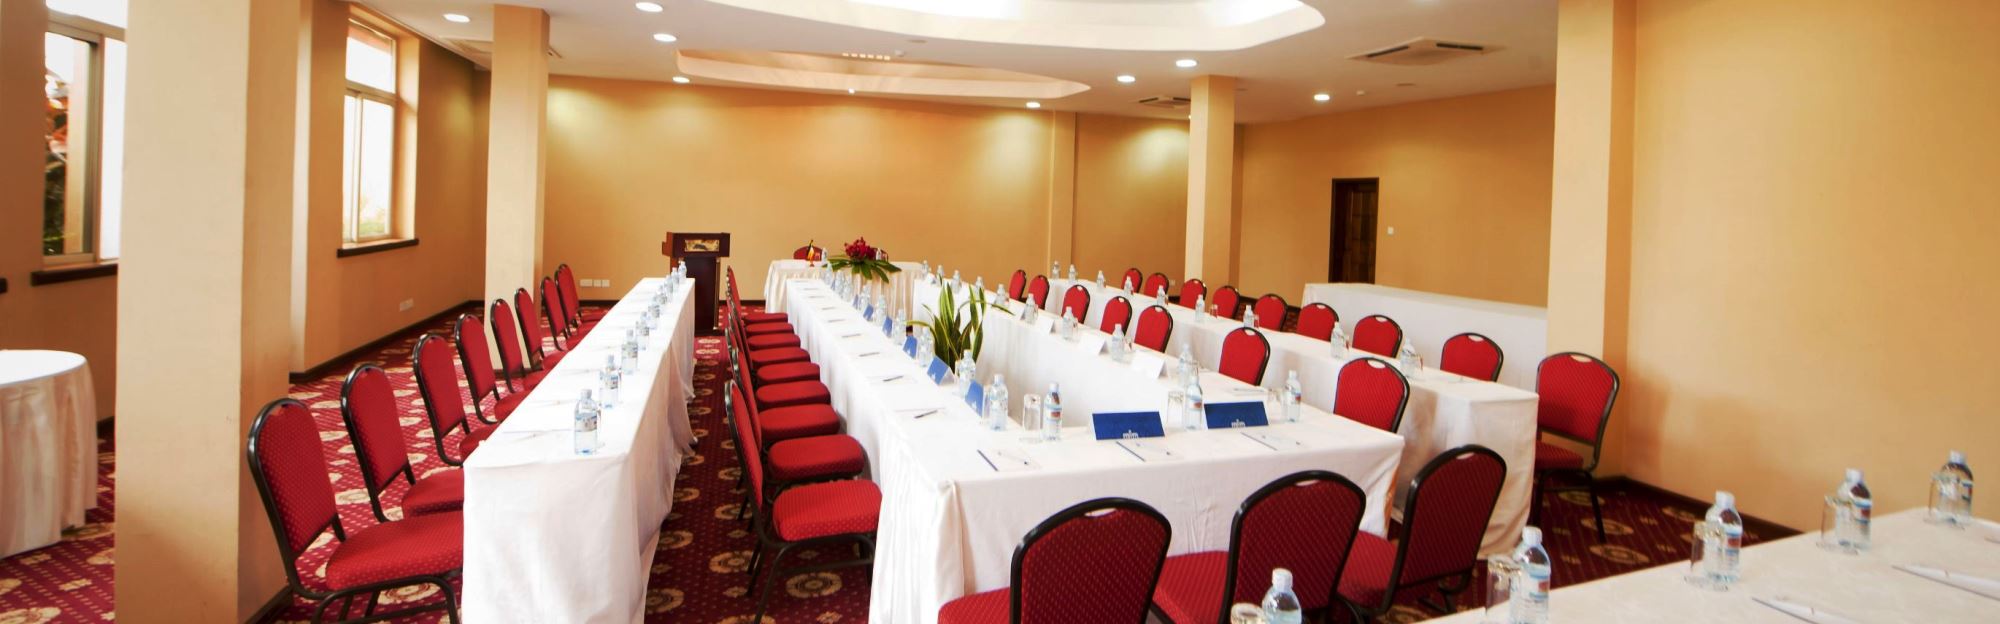 Mbale Resort Hotel Conference & Venues